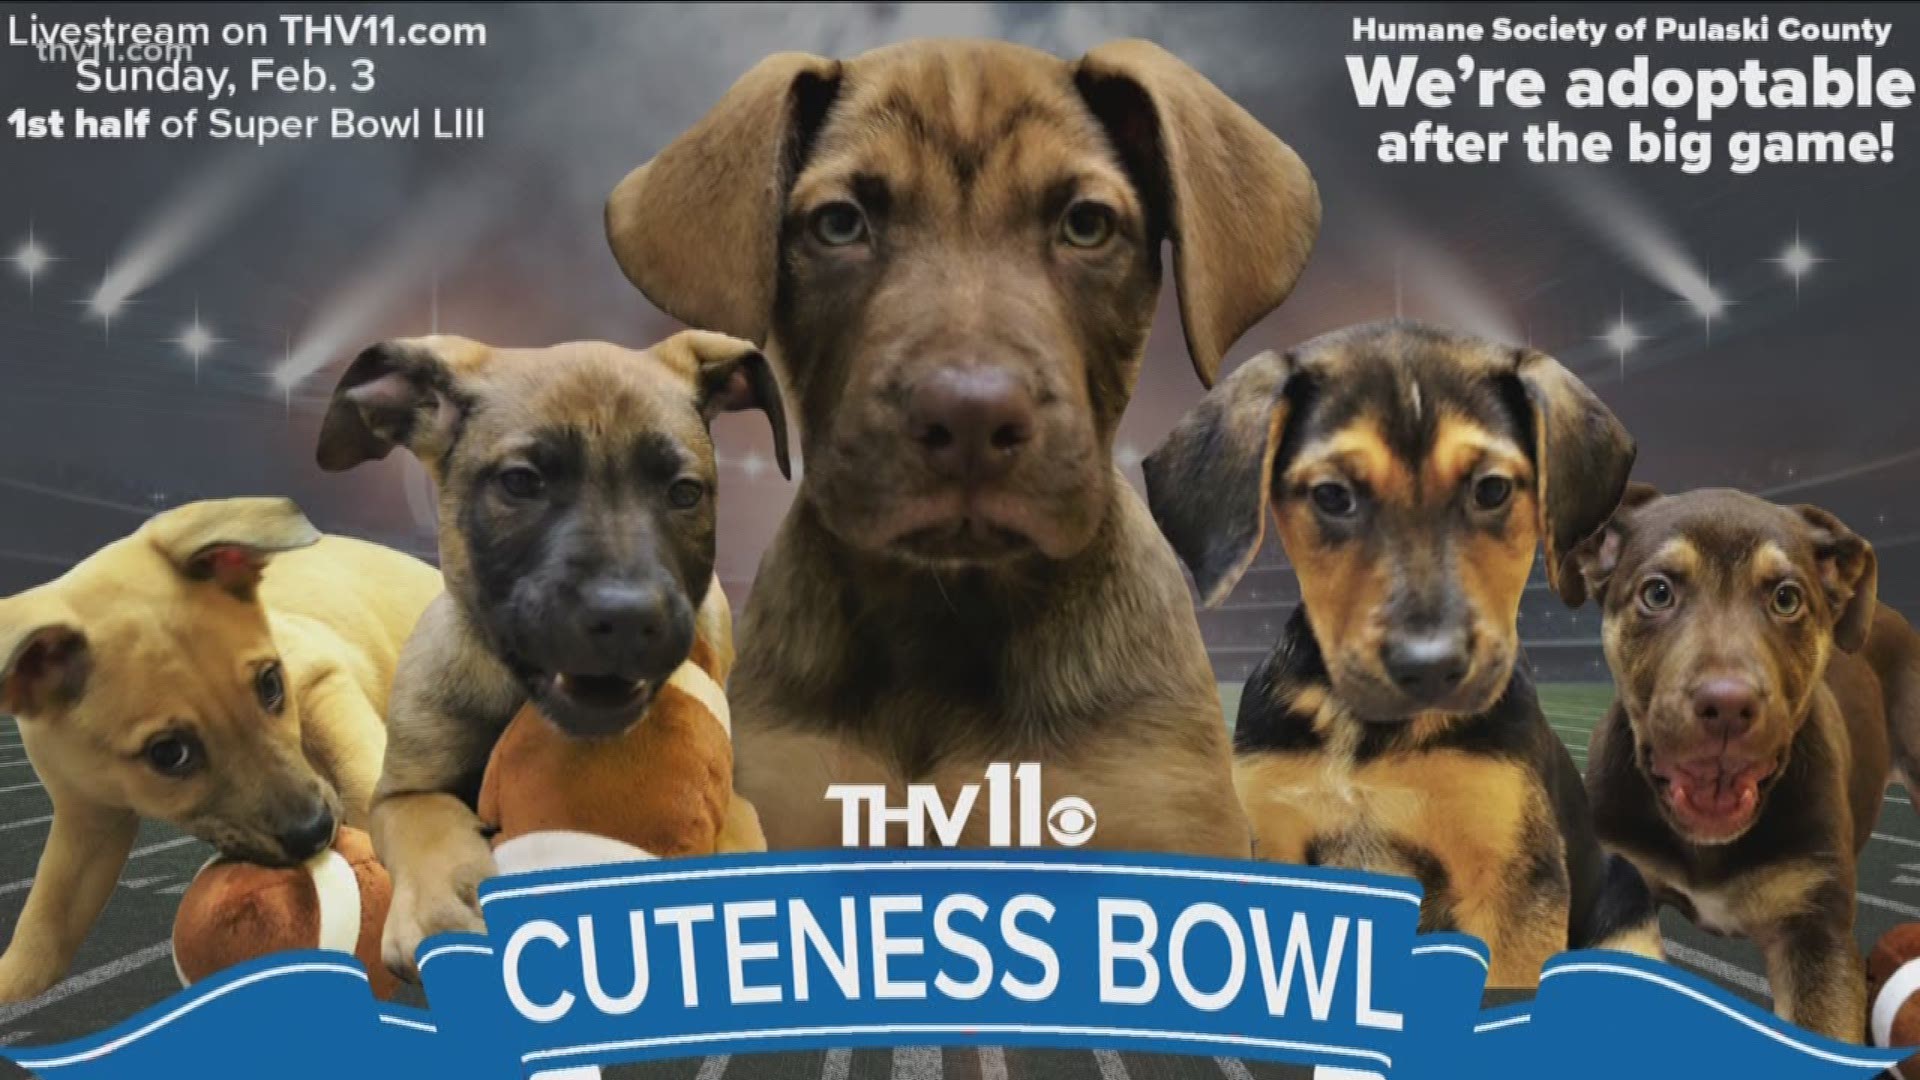 Watch the THV11 Cuteness Bowl on THV11.com on Sunday, February 3. These adoptable puppies will be available from the Humane Society of Pulaski County after the first half of Super Bowl LIII.